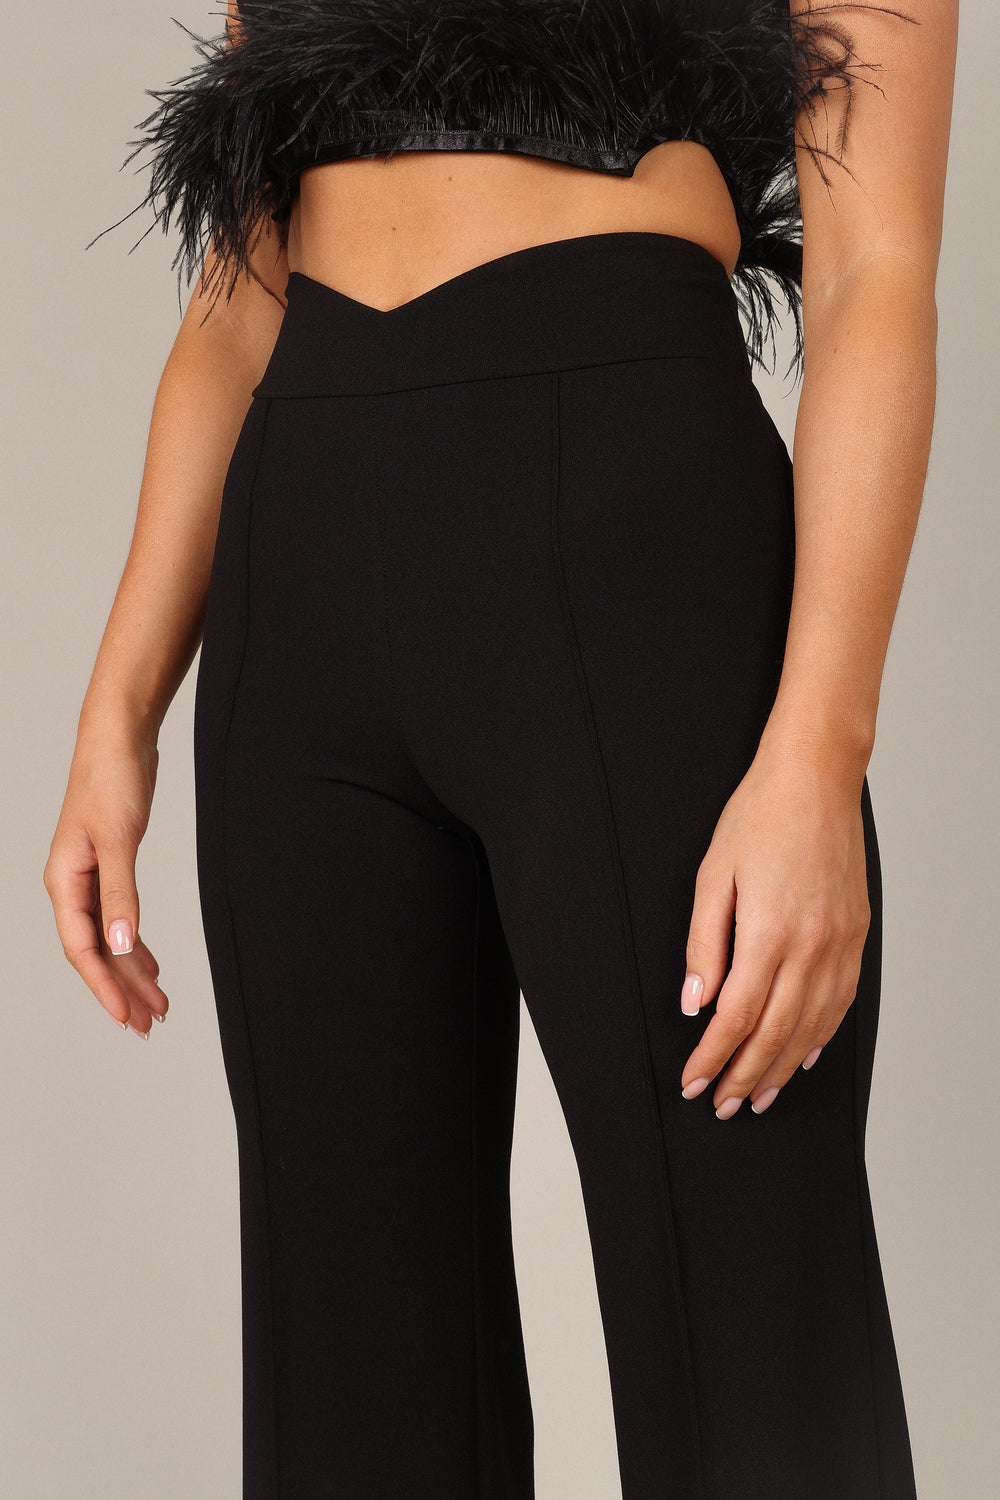 Petal and Pup USA BOTTOMS Archie High Waisted Tailored Pants - Black